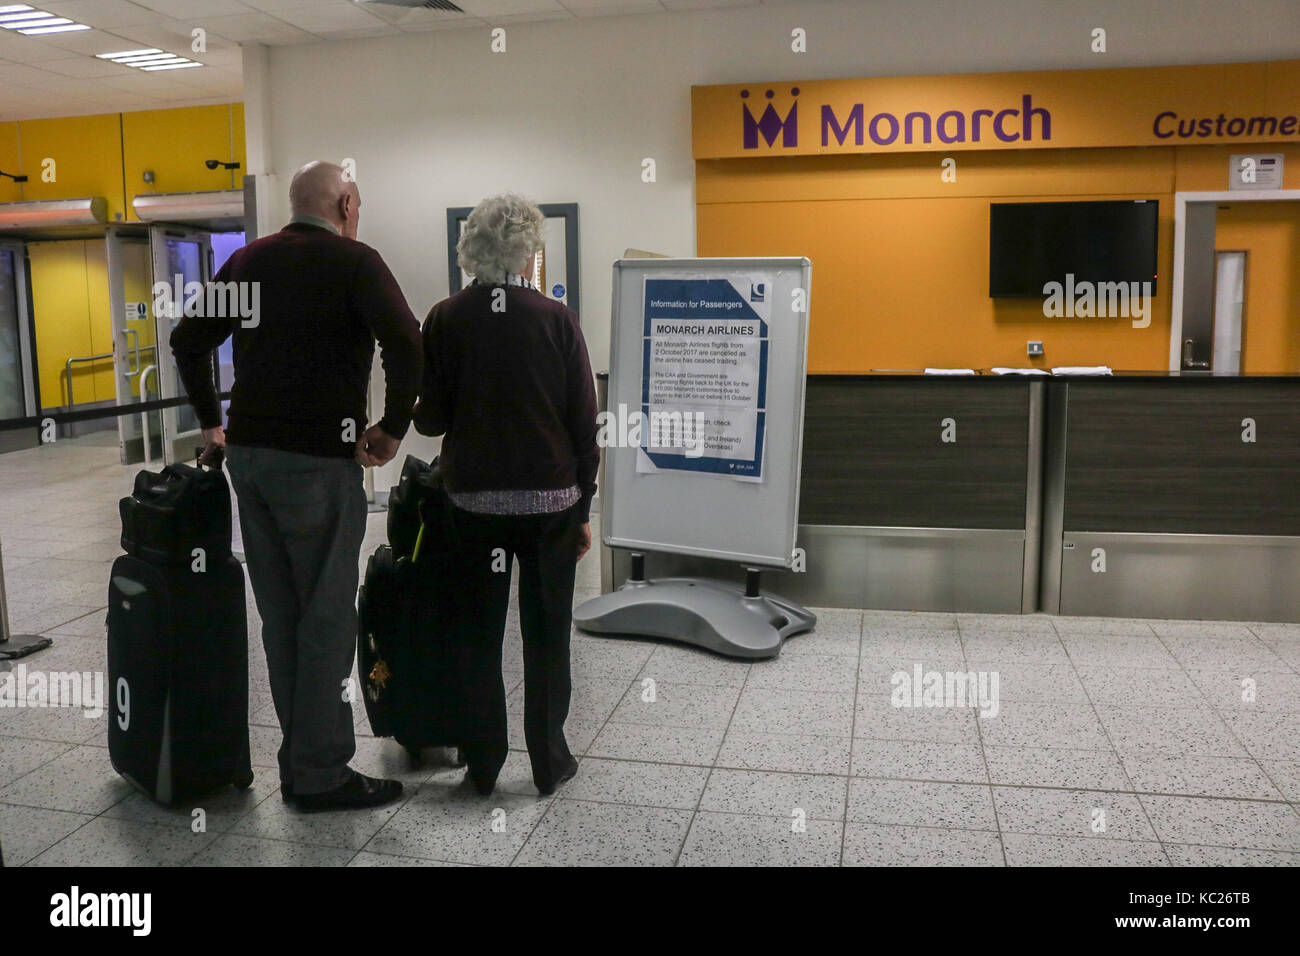 London, UK. 2nd Oct, 2017. Gatwick Airport: Monarch airline service desk at Gatwick Airport. Monarch Airlines which was founded in 1967 has ceased trading and entered into administration due to loss in revenue which is blamed on Terror attacks in Tunisia and Egypt and its 300,000 future bookings for flights and holidays have been cancelled . The British Government has asked the Civil Aviation Authority (CAA) to coordinate flights back to Britain for all Monarch customers currently stranded overseas and customers will not bear extra costs on new flights Credit: amer ghazzal/Alamy Live News Stock Photo